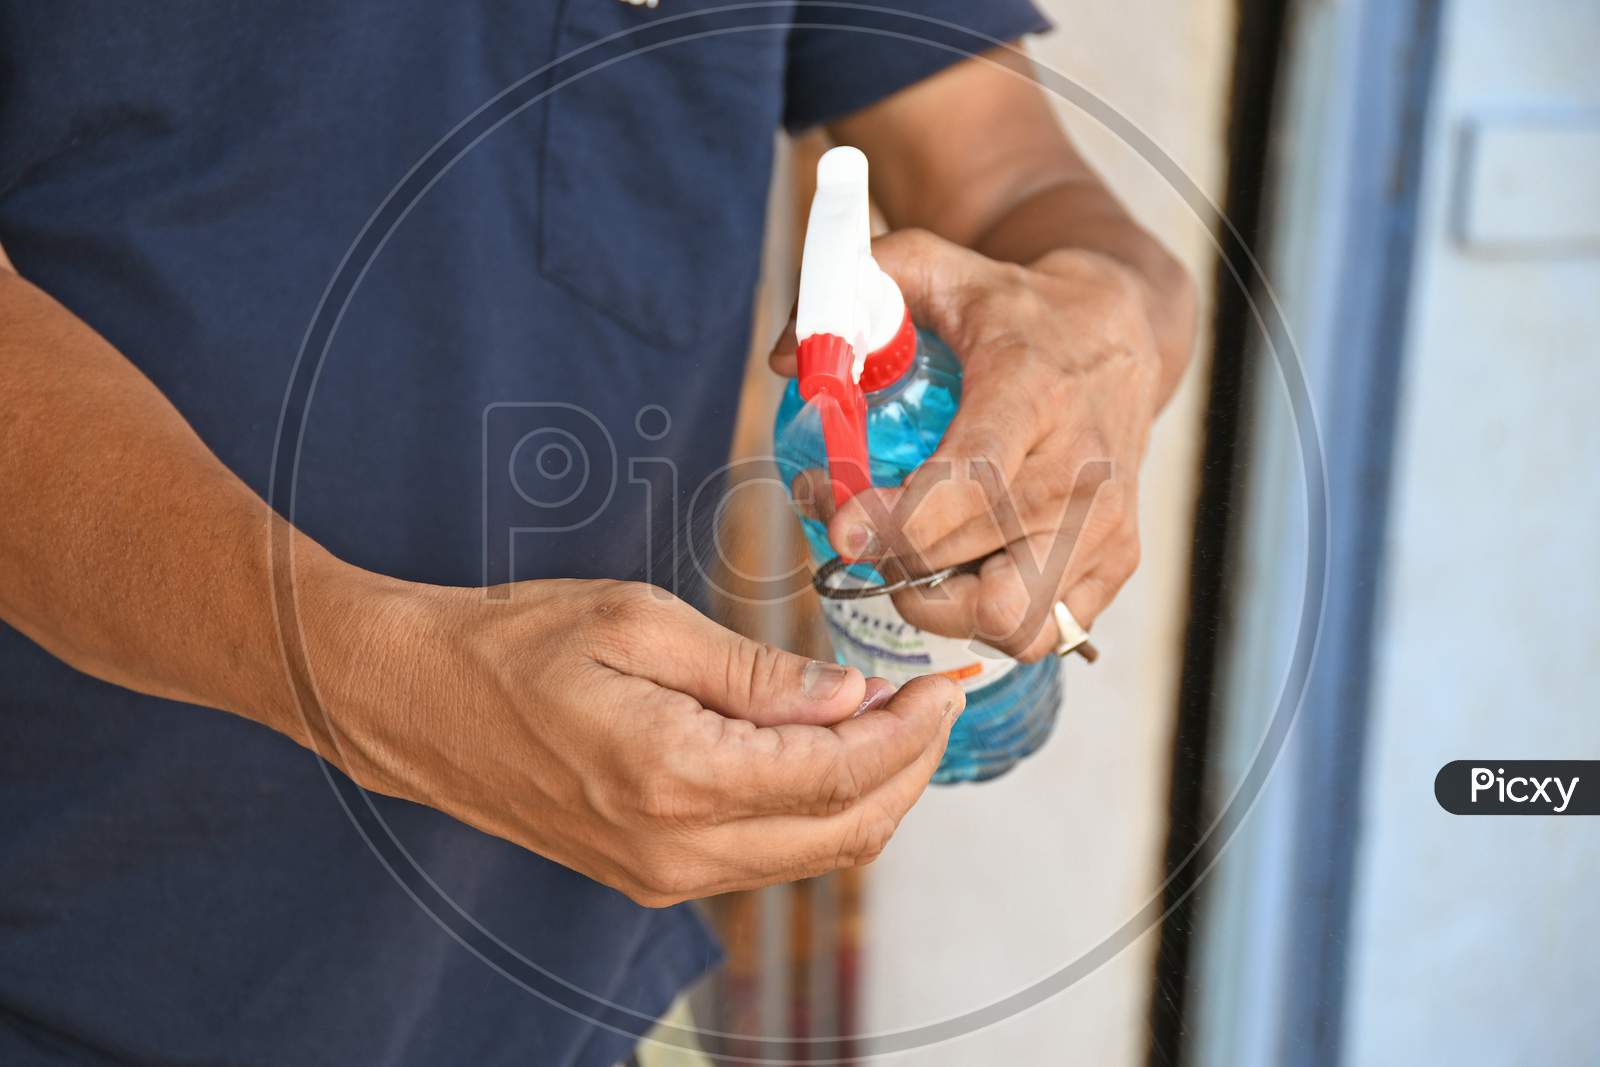 People are using alcohol based hand sanitizers to prevent Novel Coronavirus (COVID-19) infections. At Burdwan Town, Purba Bardhaman District, West Bengal, India.